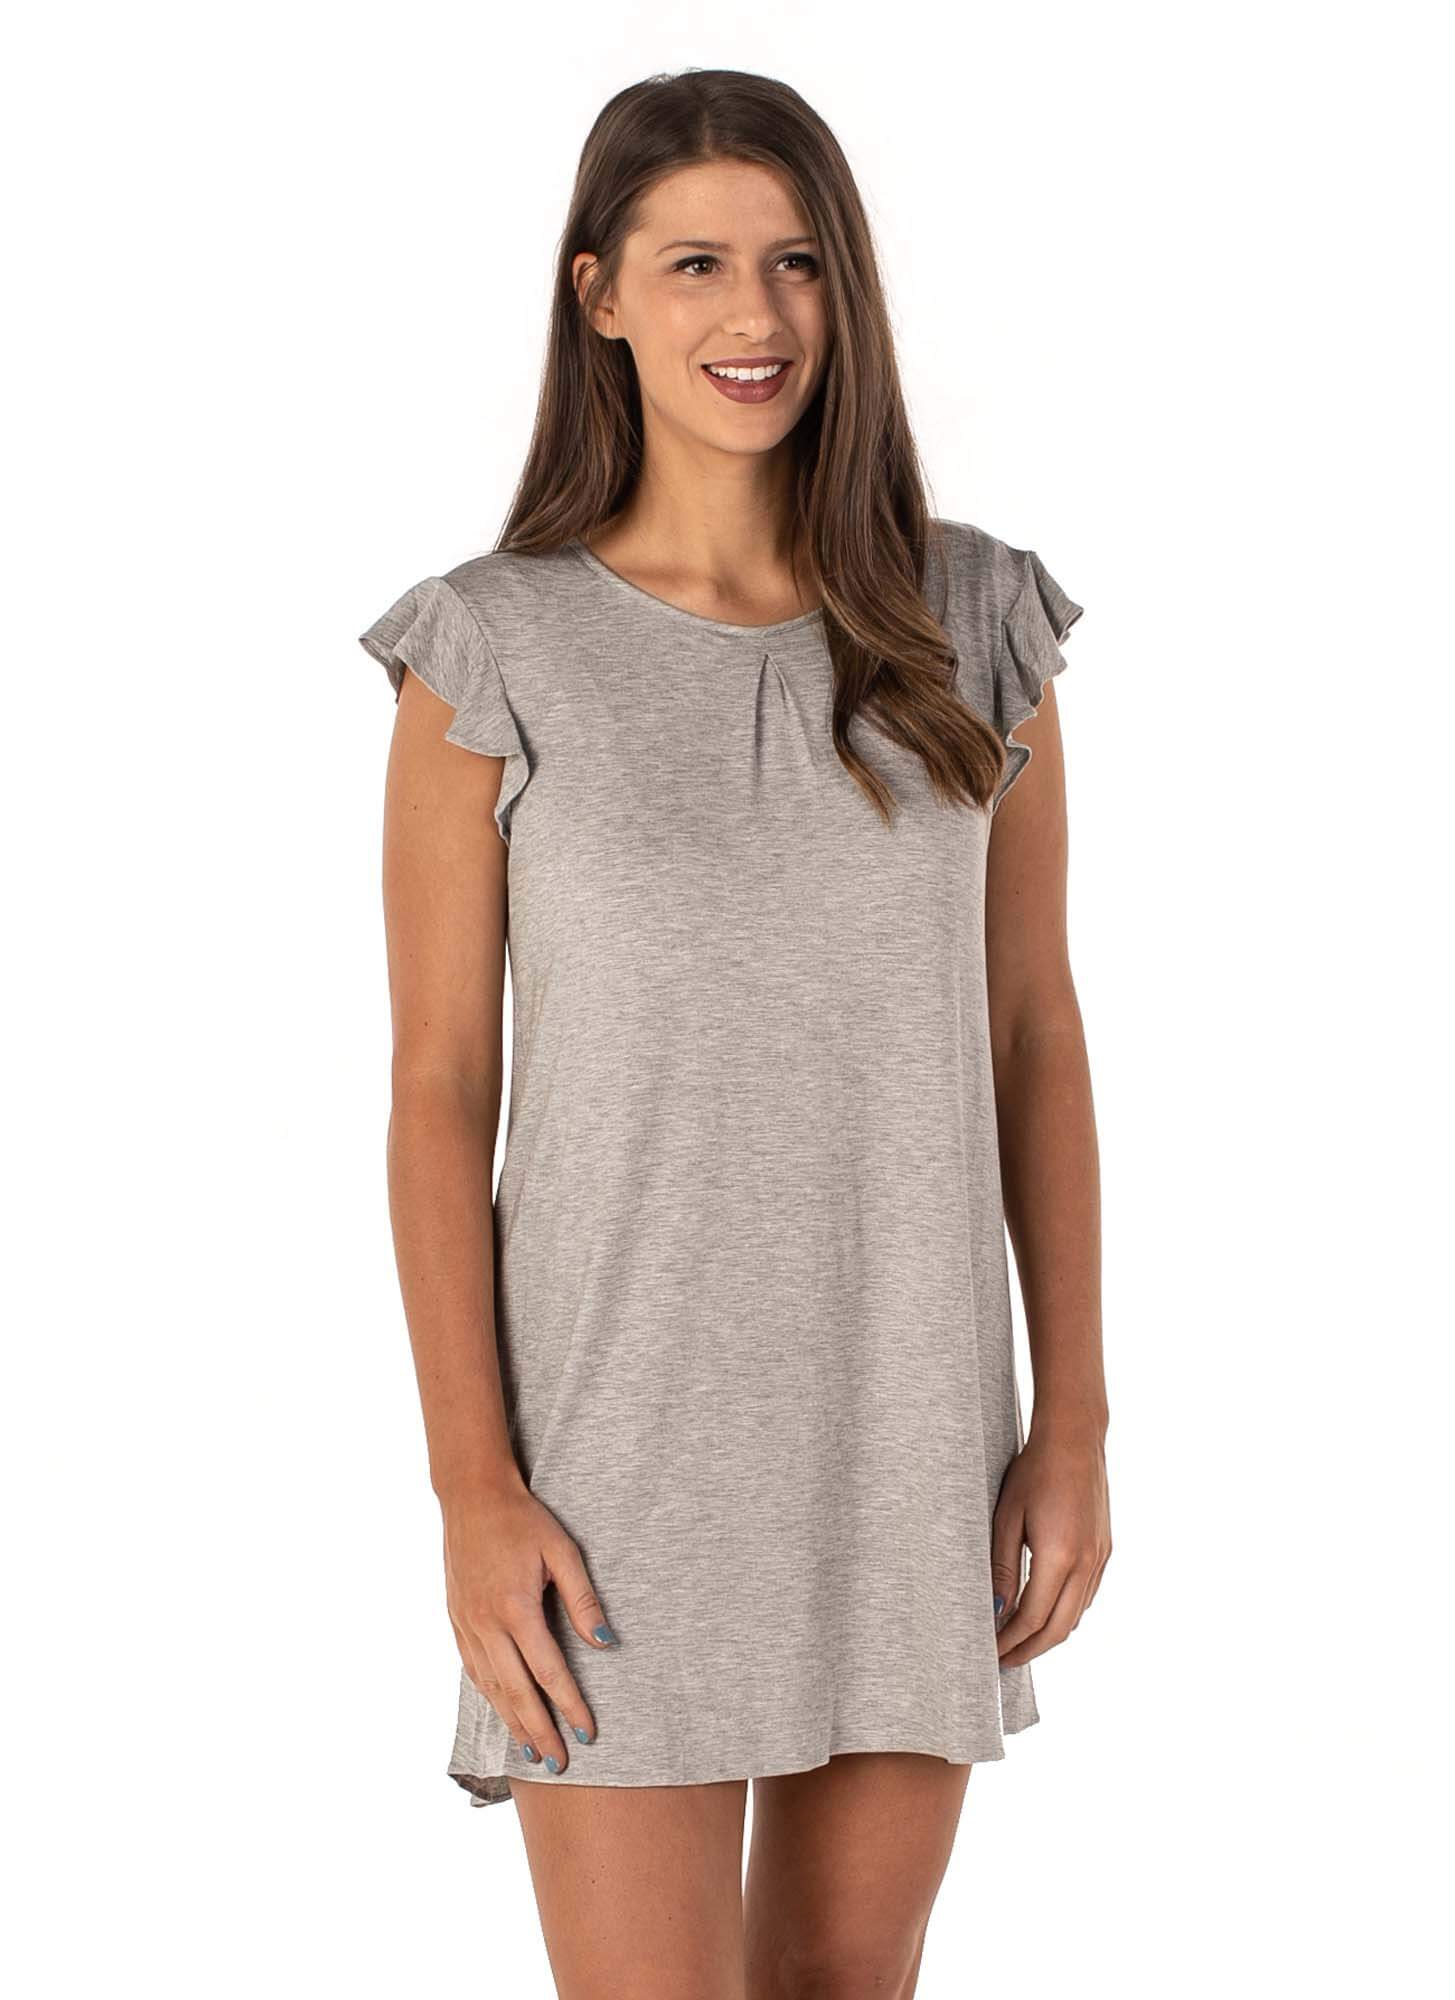 heather gray nightgown with built in shelf bra